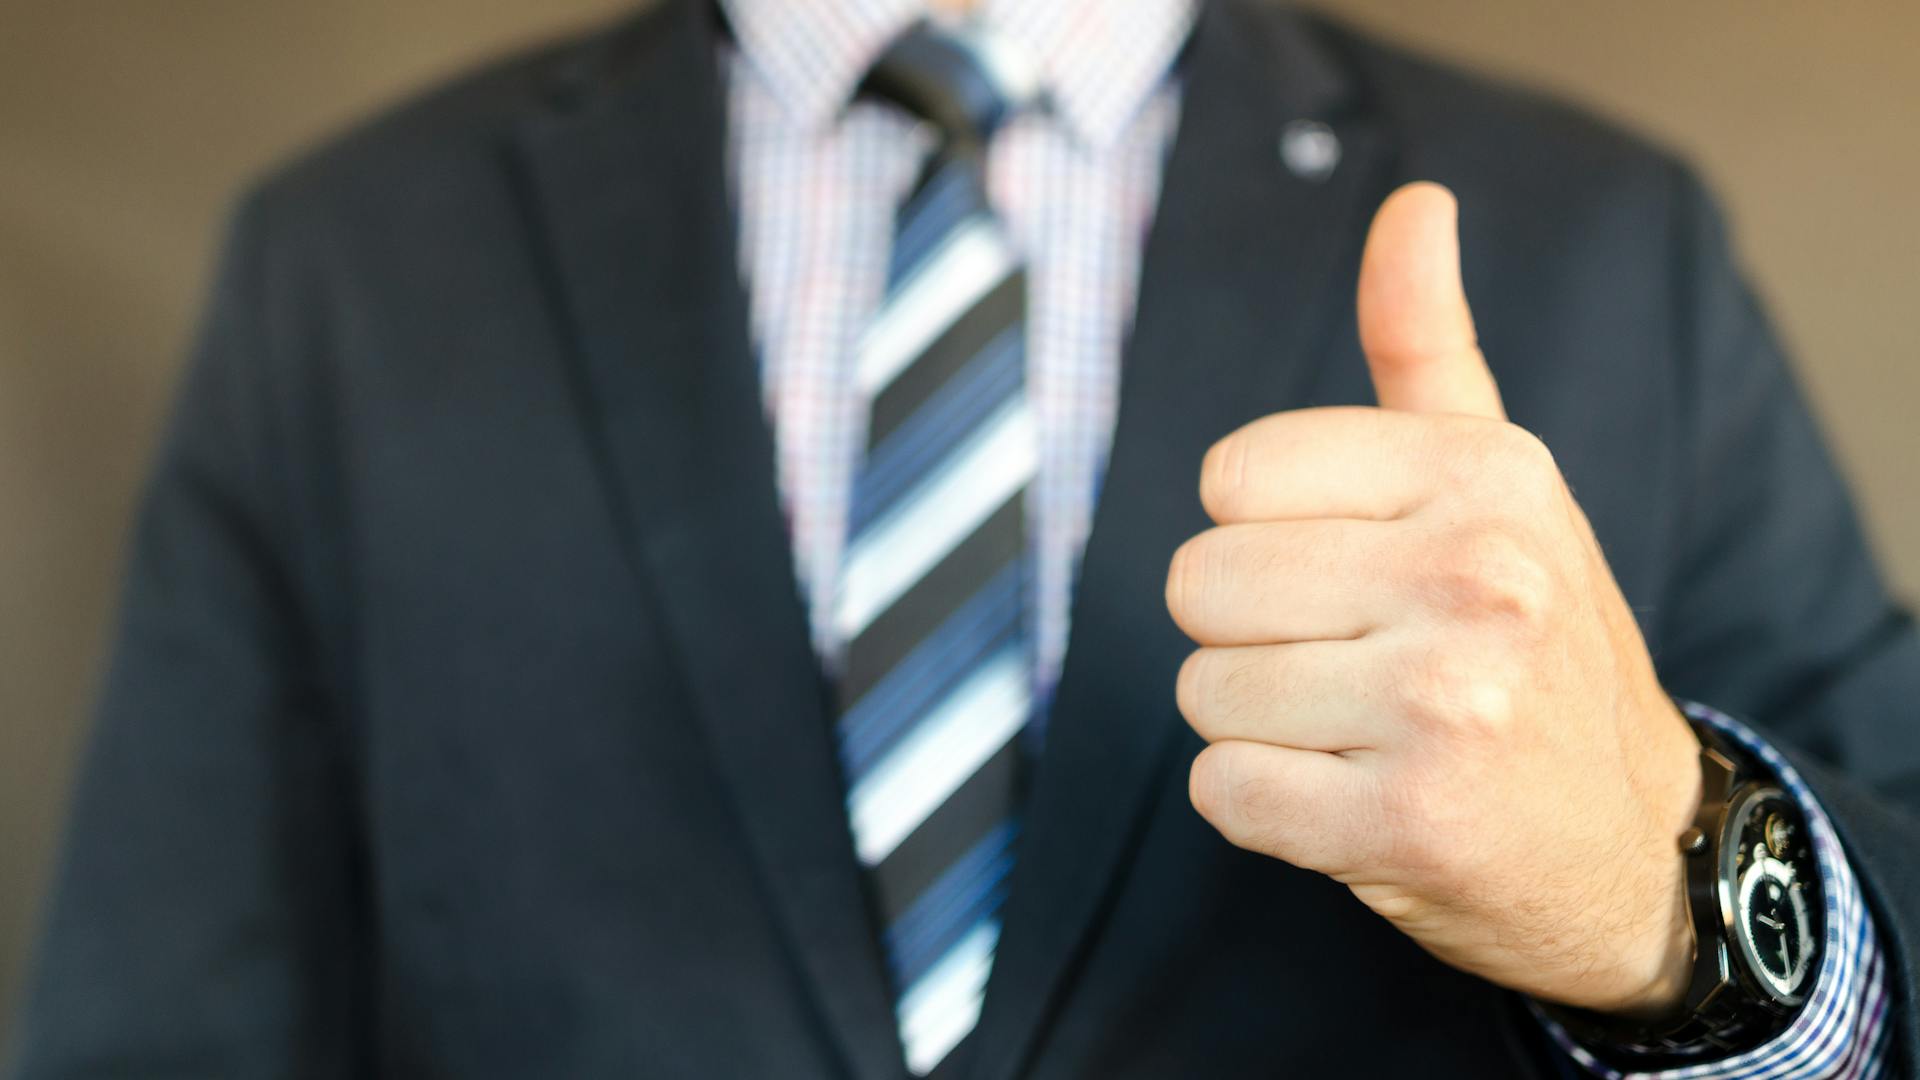 Man In Black Formal Suit Jacket Giving the Thumbs Up sign